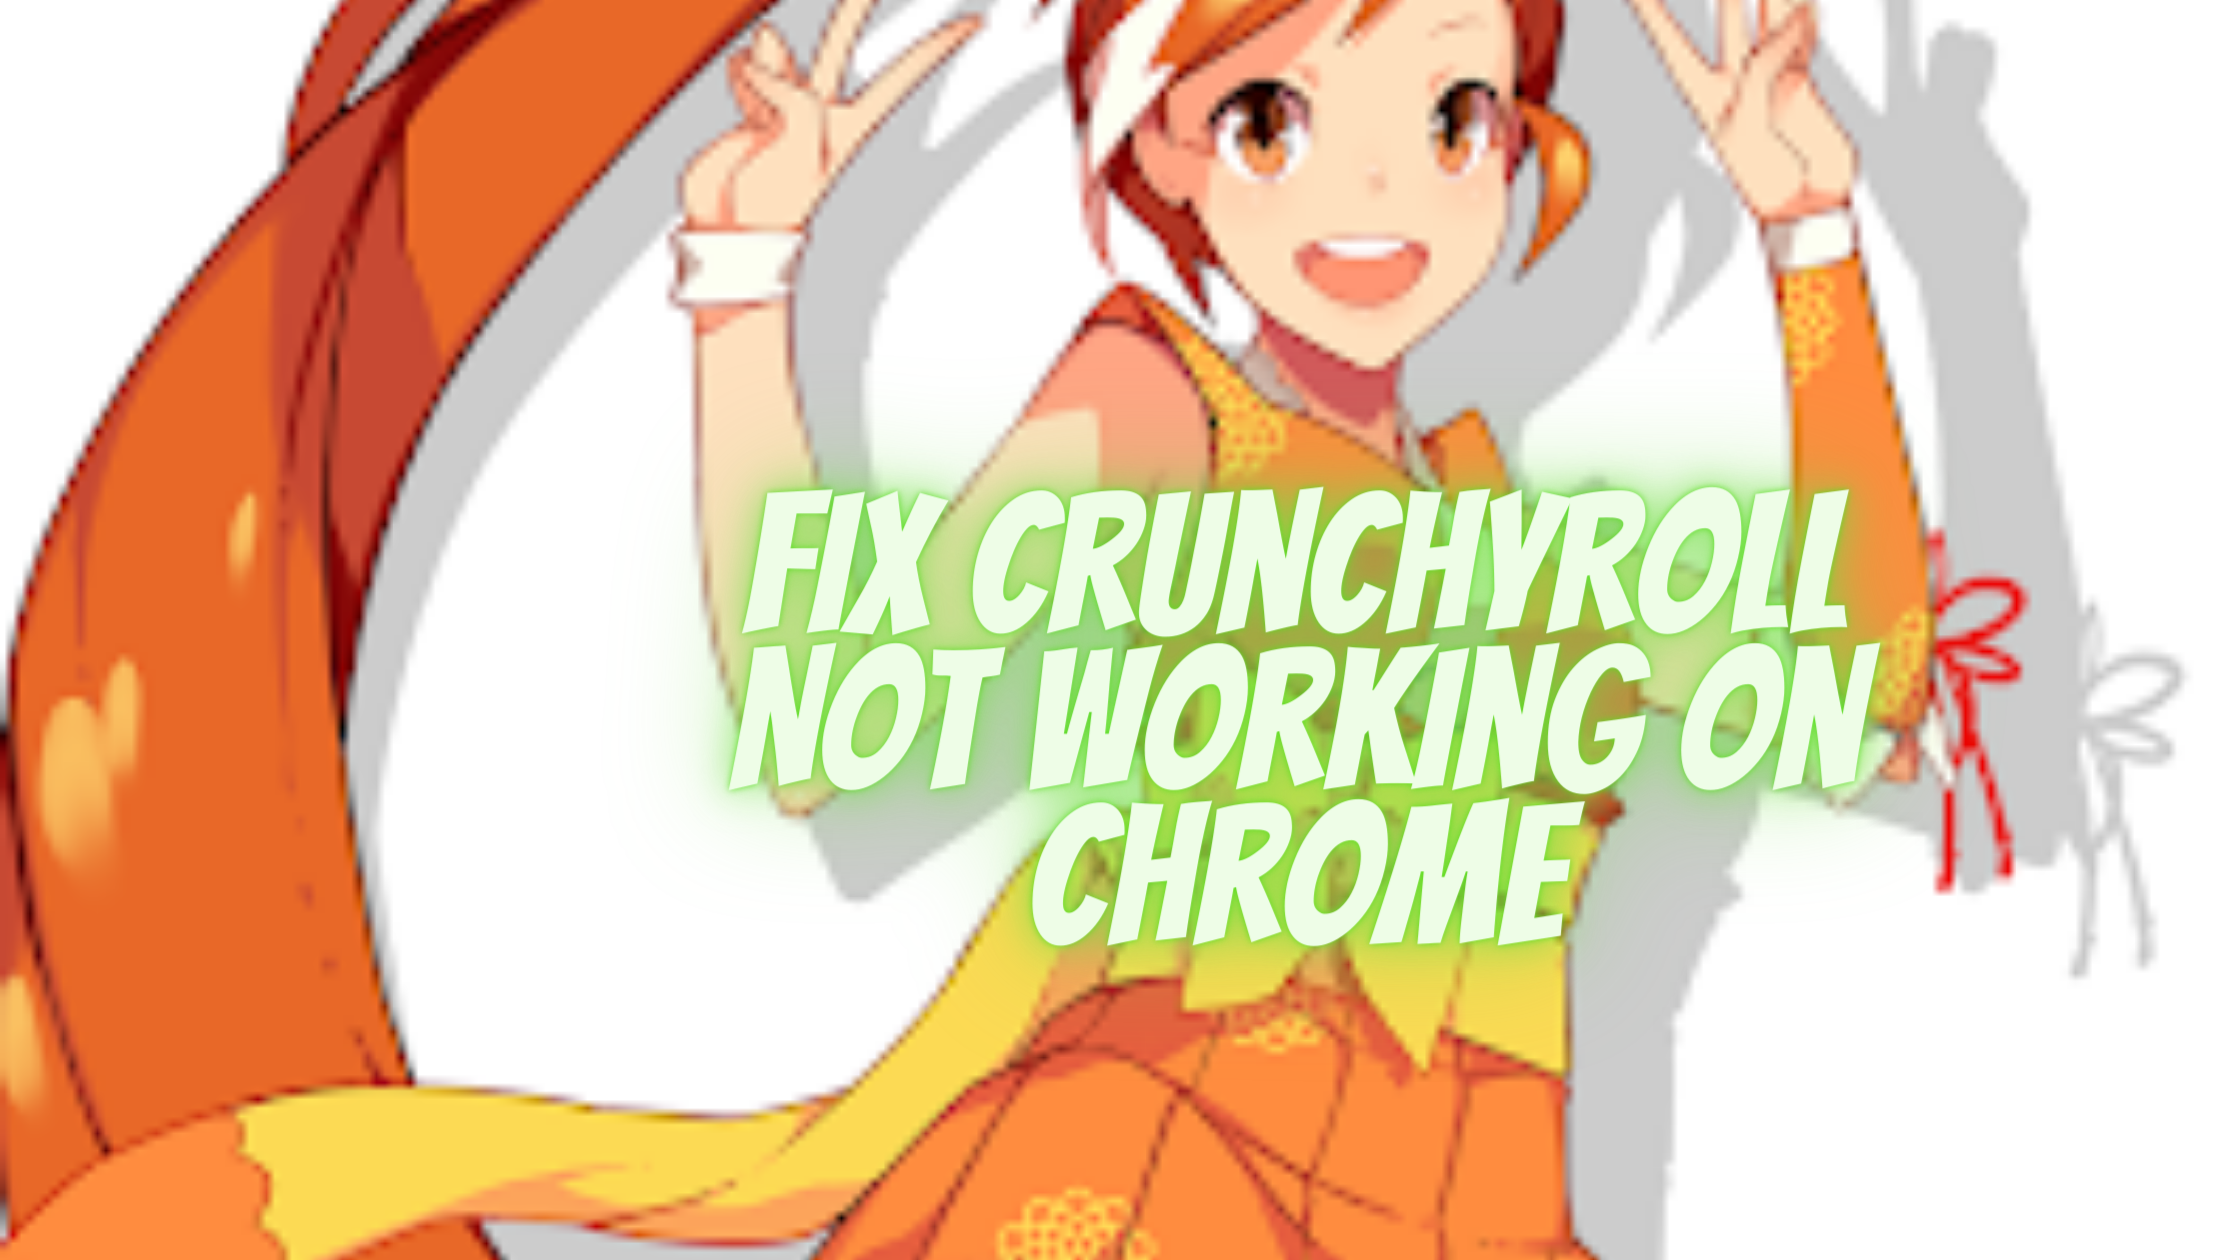 How To Fix Crunchyroll Not Working on Chrome